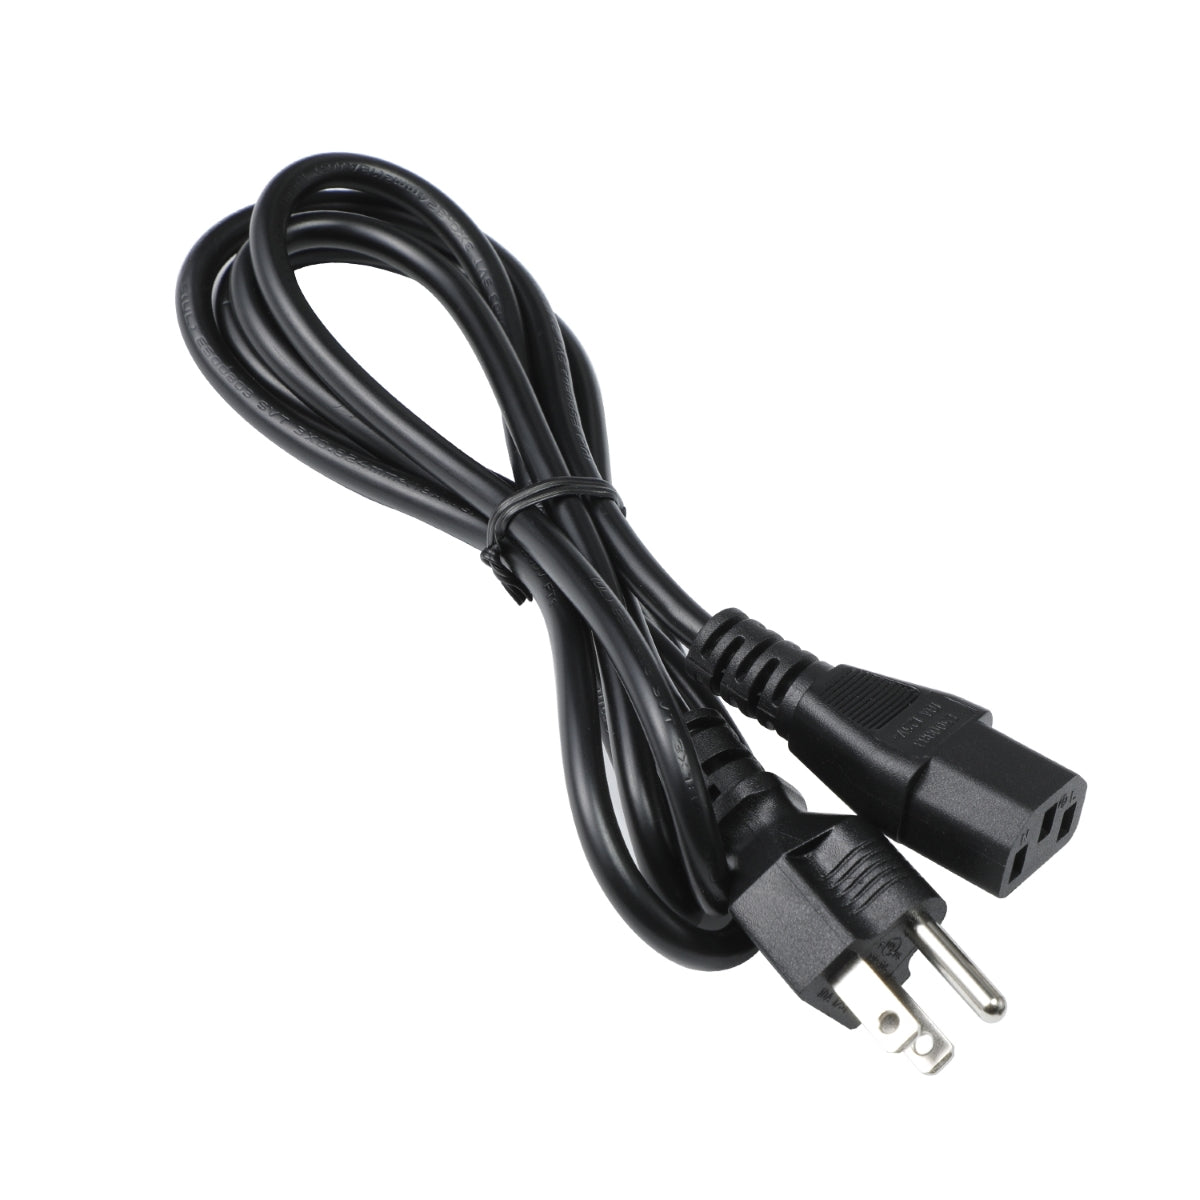 Power Cord for HP Pavilion 550-047c Computer.